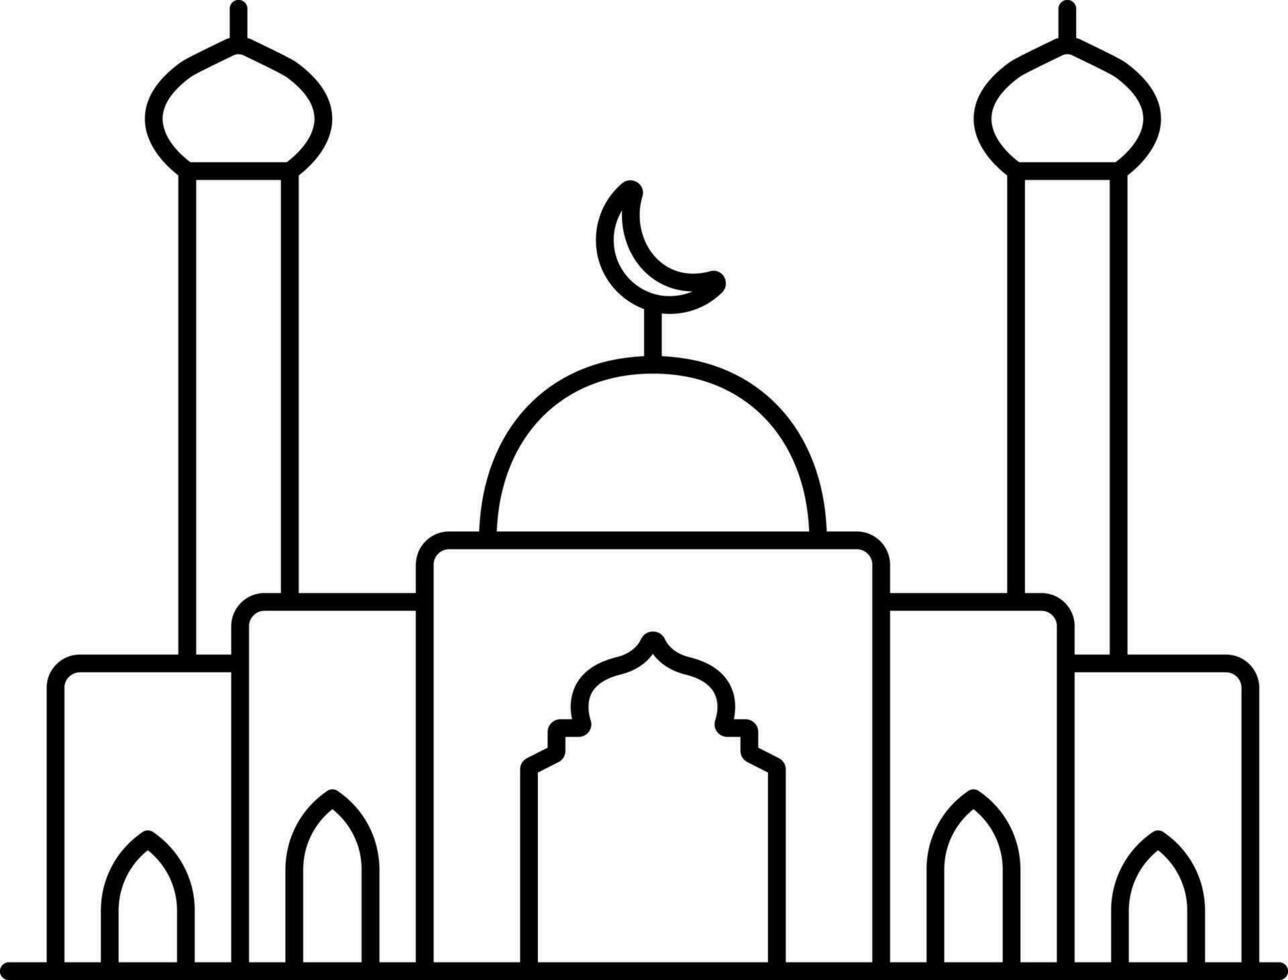 Black Outline Illustration Of Mosque Building Icon. vector